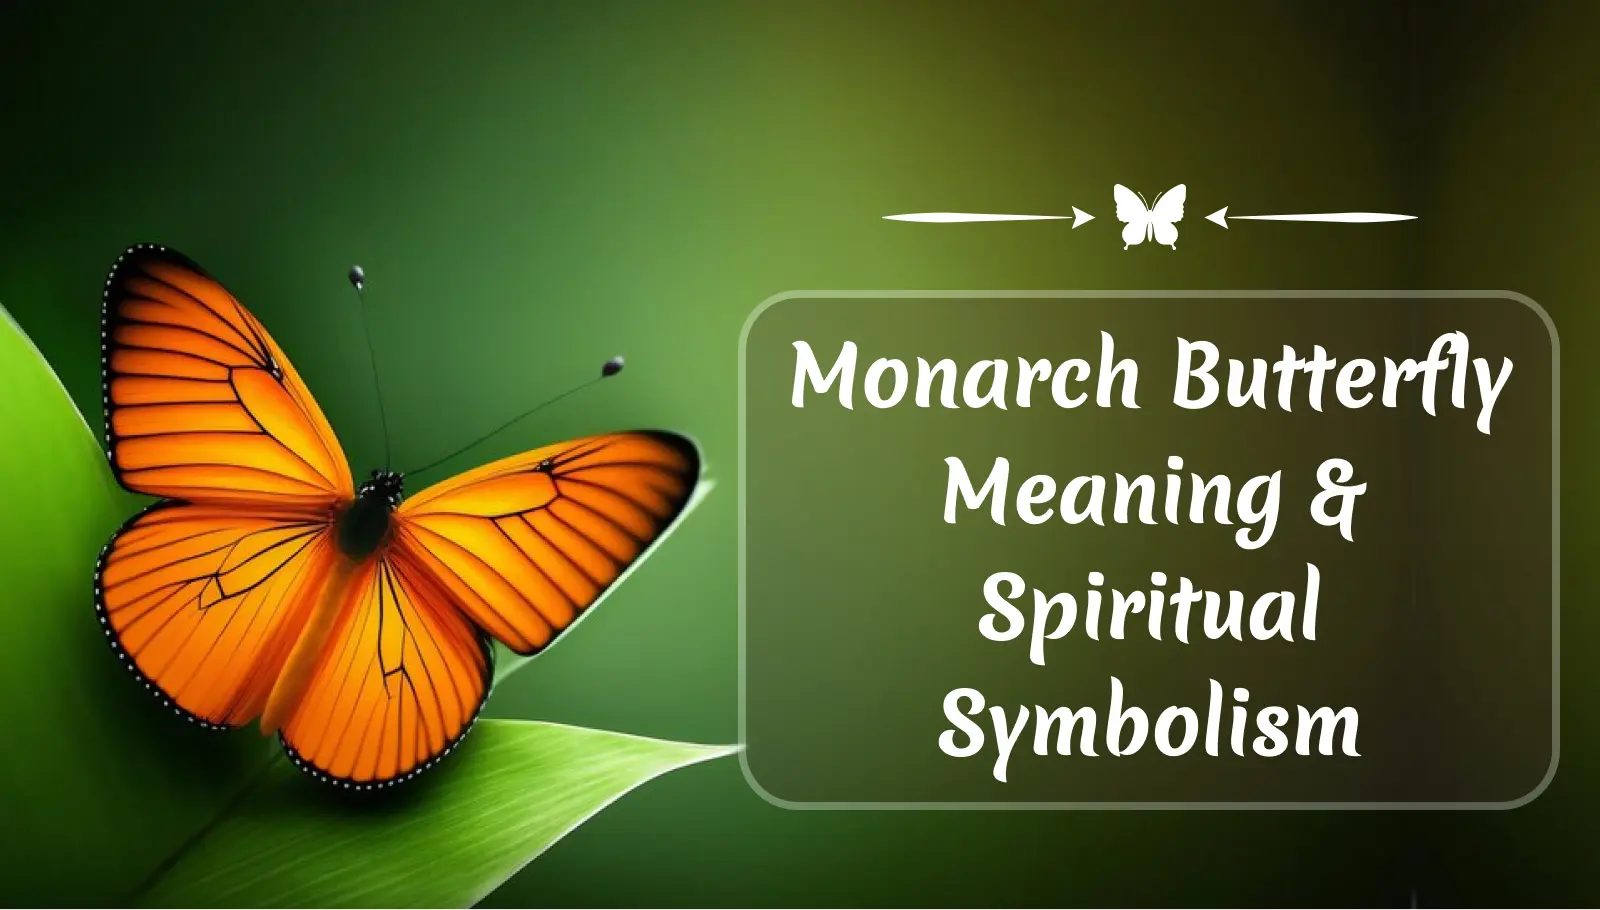 Monarch Butterfly Meaning & Spiritual Symbolism